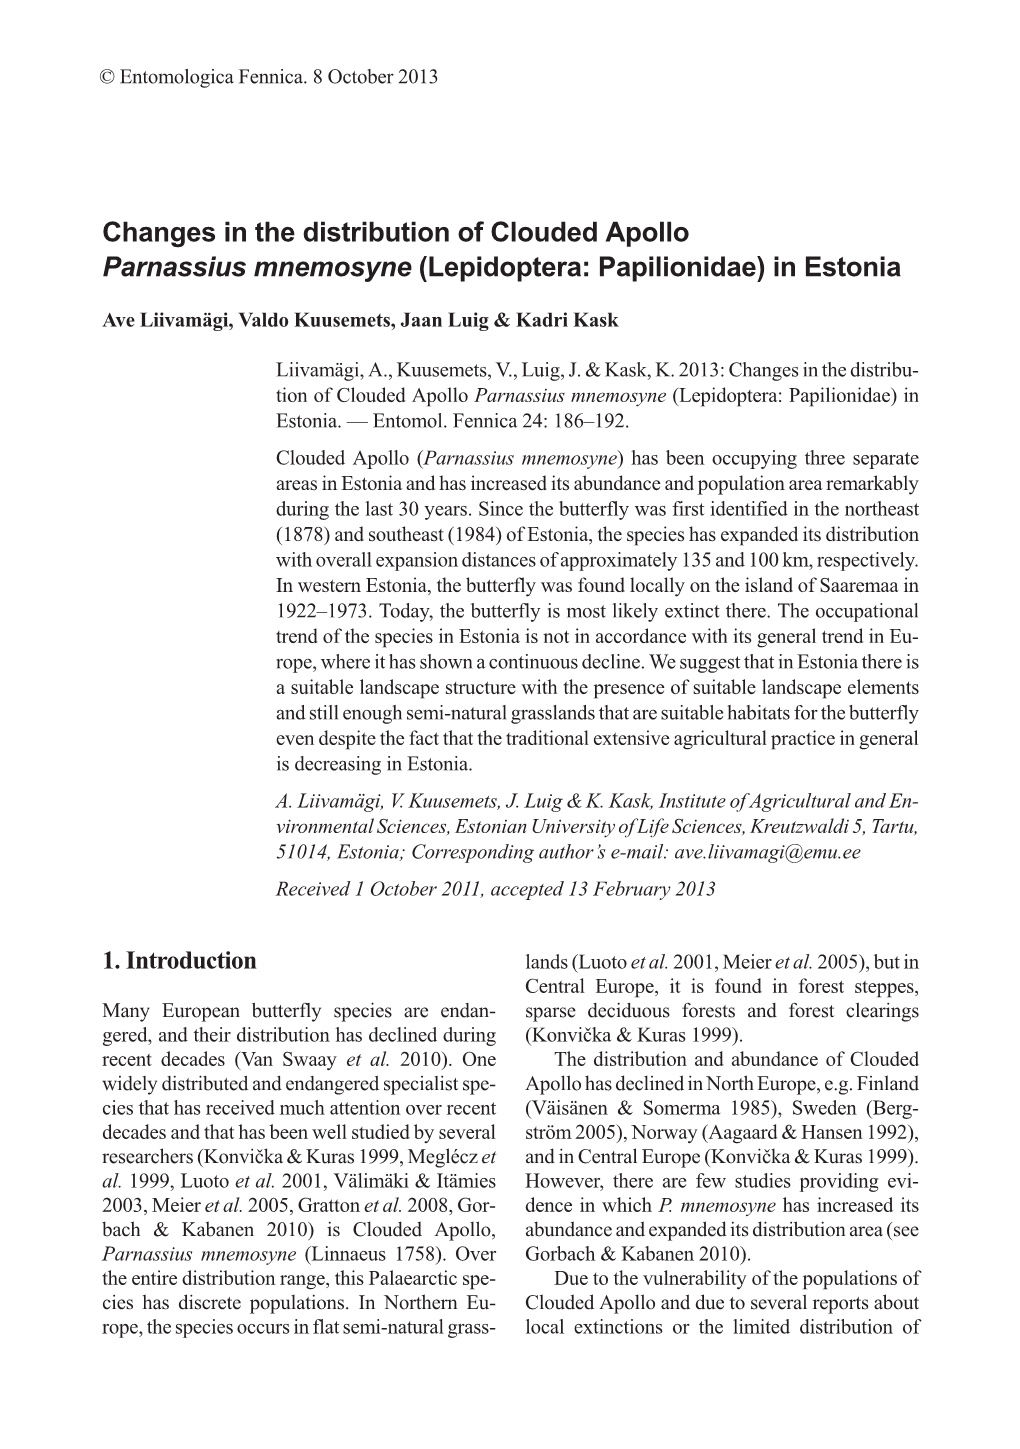 Changes in the Distribution of Clouded Apollo Parnassius Mnemosyne (Lepidoptera: Papilionidae) in Estonia